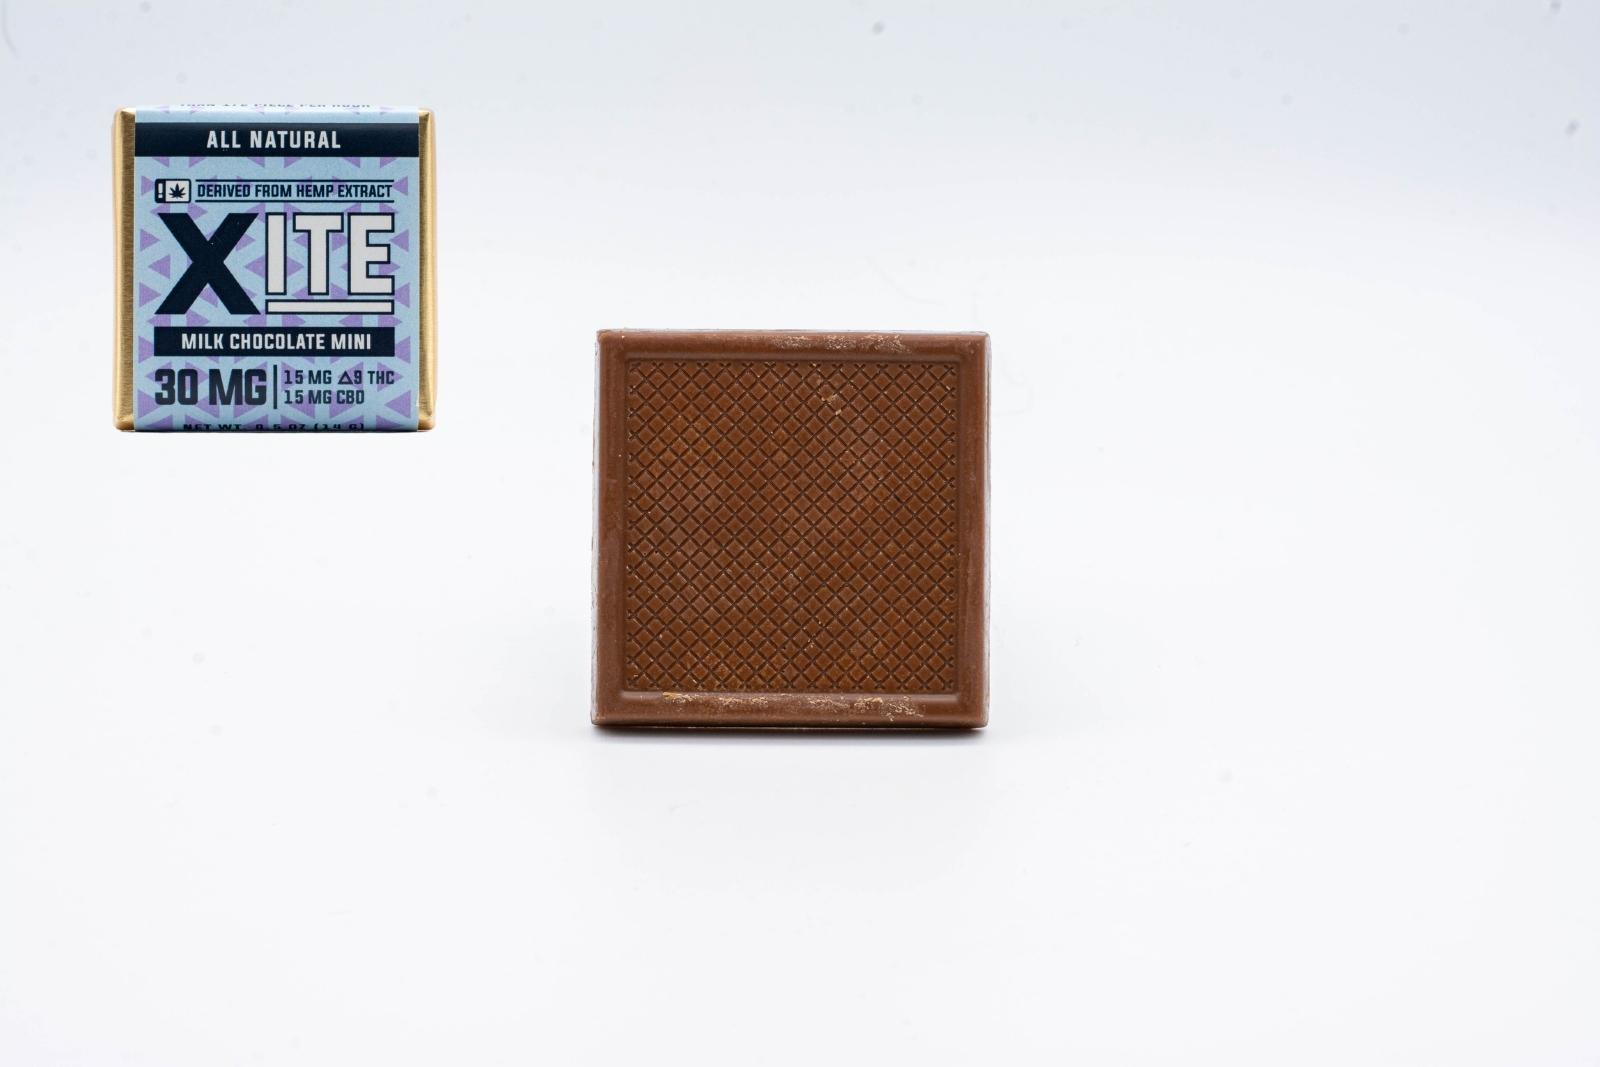 One unwrapped Xite 1:1 Delta 9 Milk Chocolate Mini, on a white background